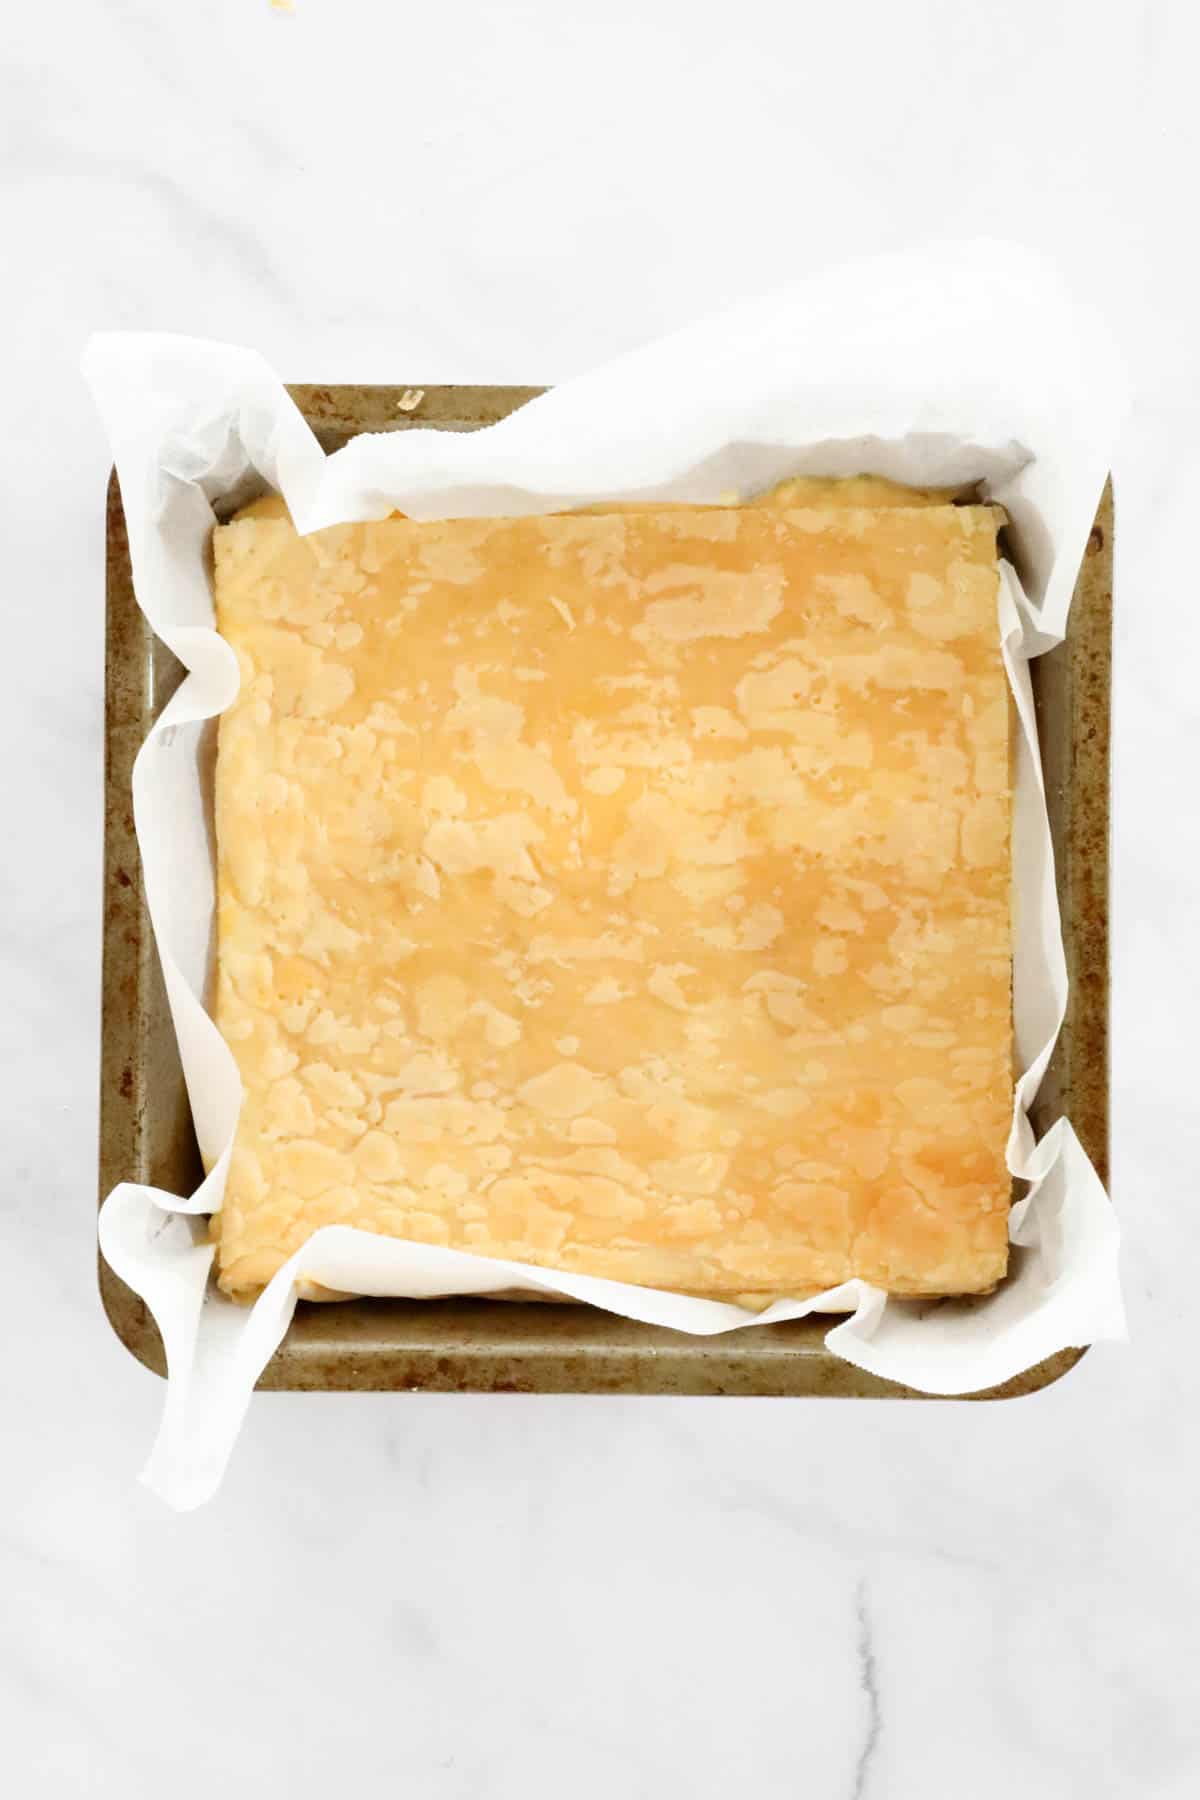 The top layer of puff pastry placed on top of the thickened custard in the baking tin.